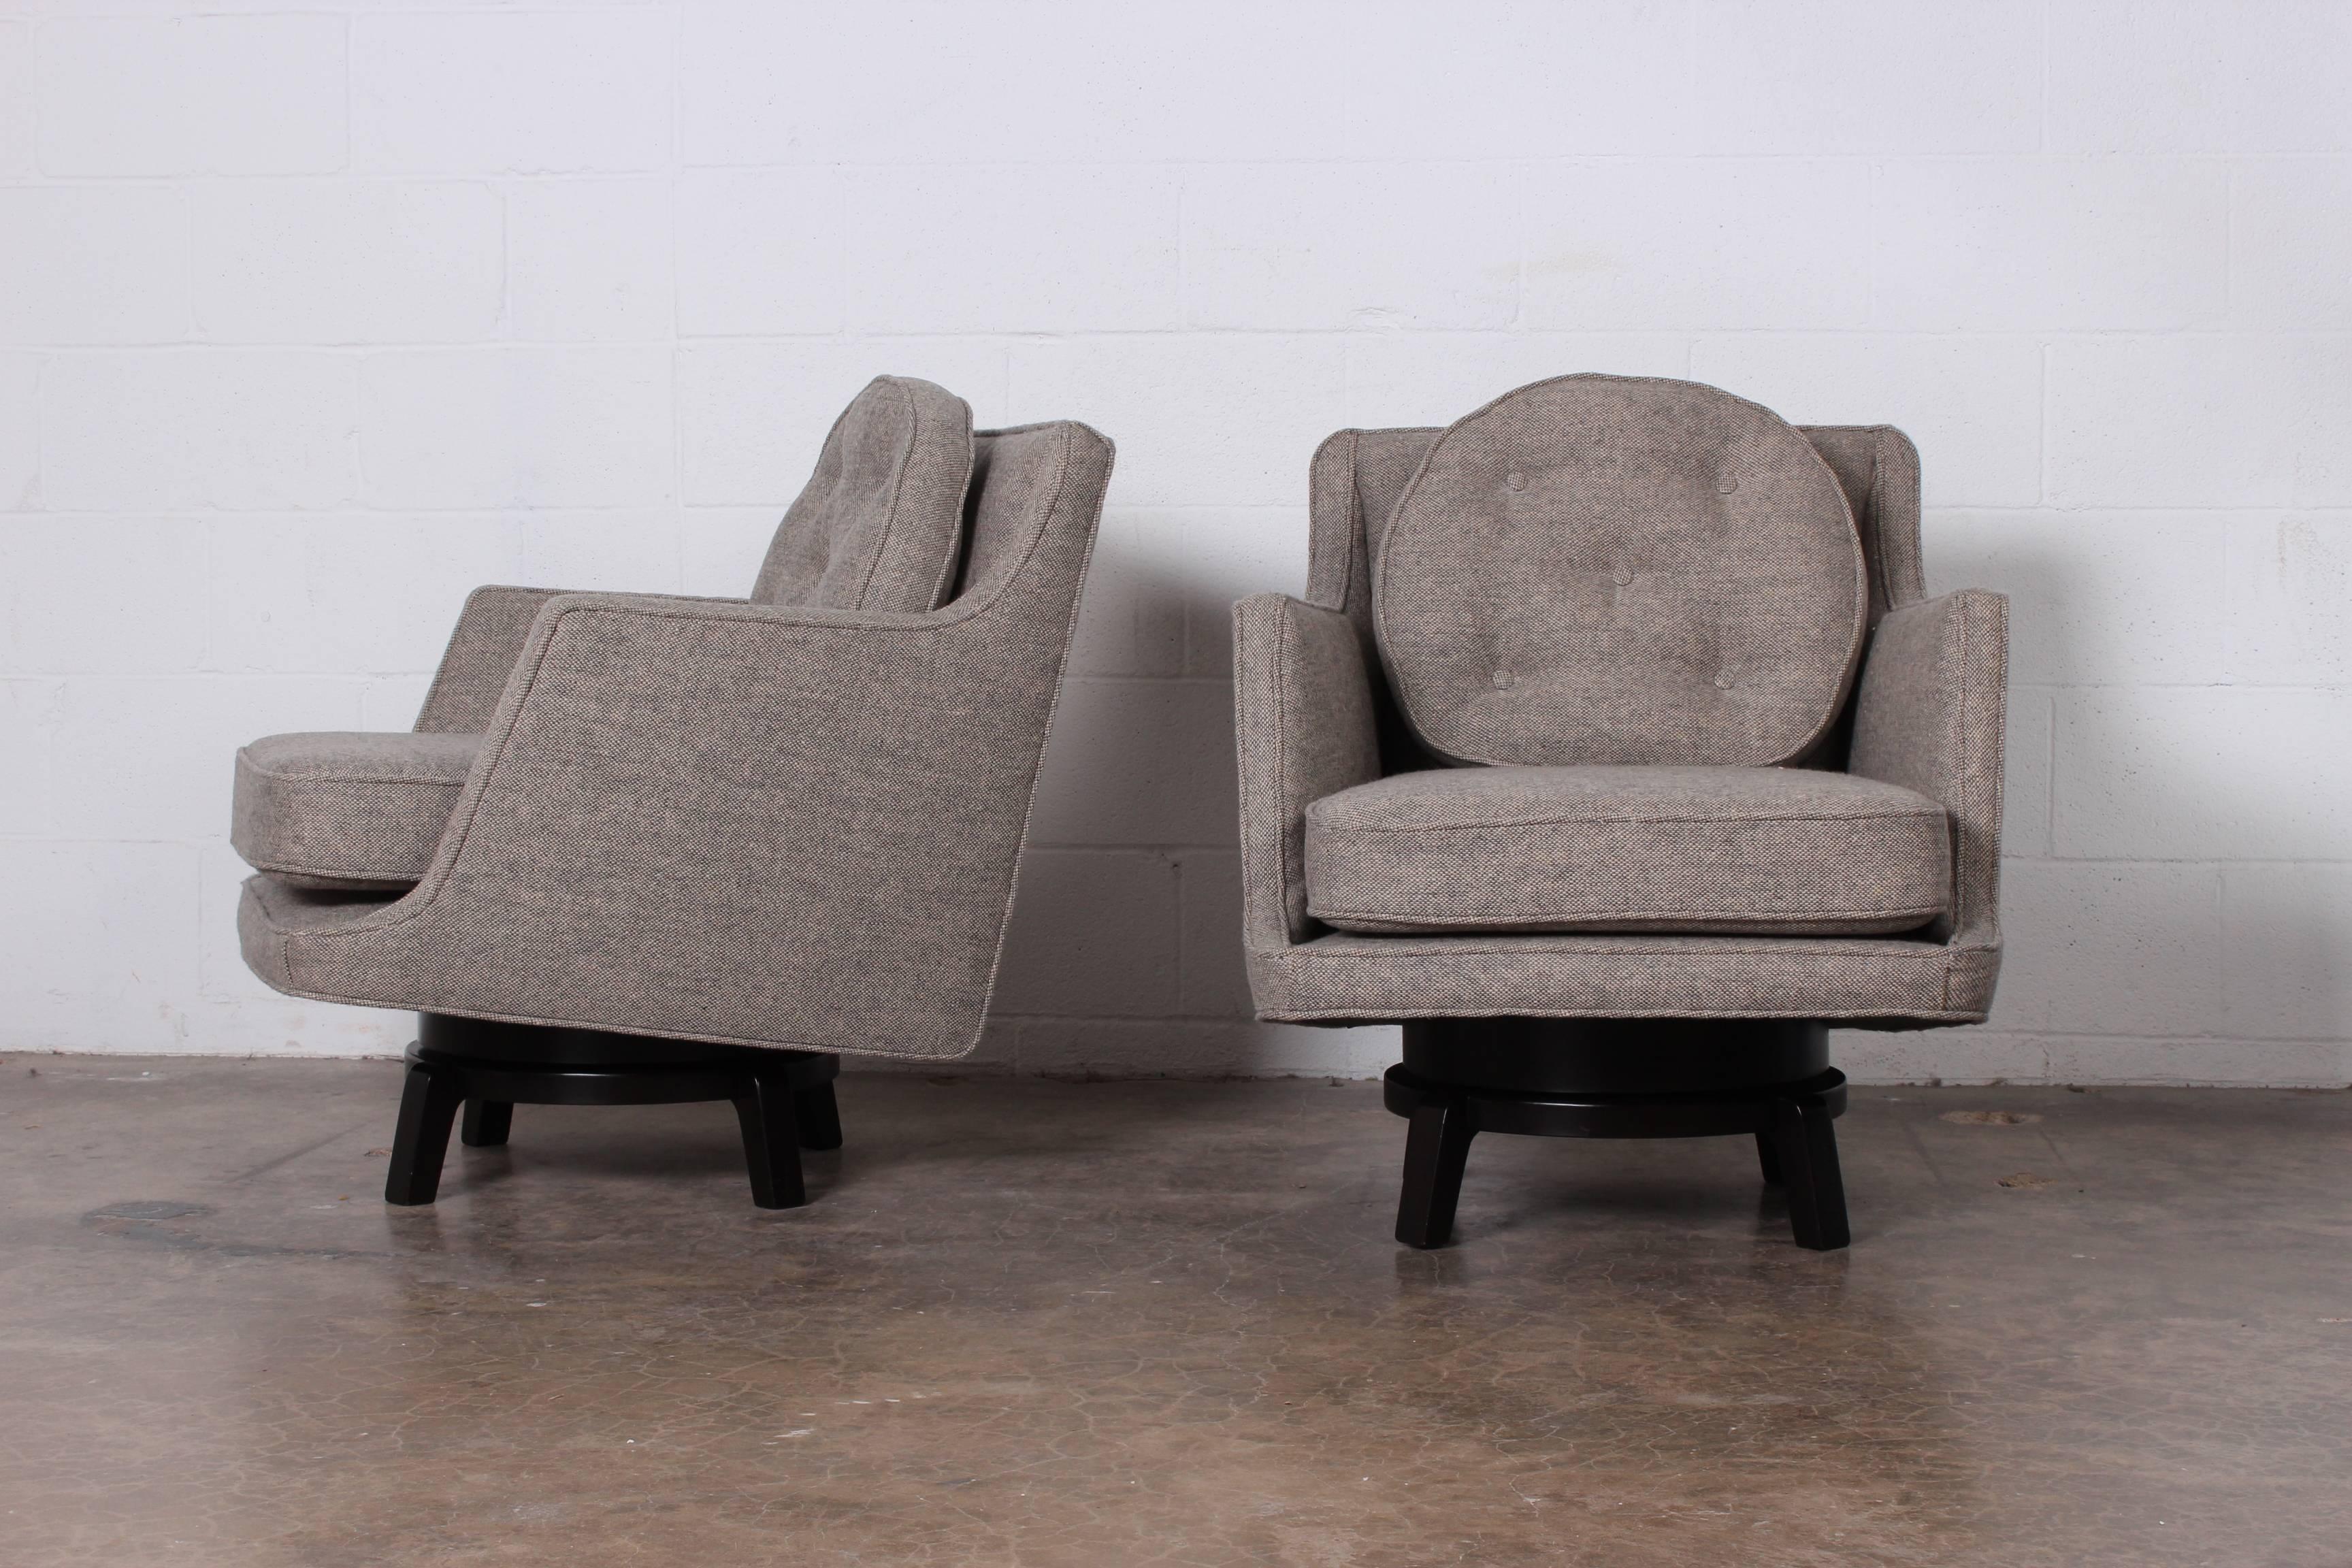 A pair of swiveling lounge chairs on mahogany bases. Designed by Edward Wormley for Dunbar.